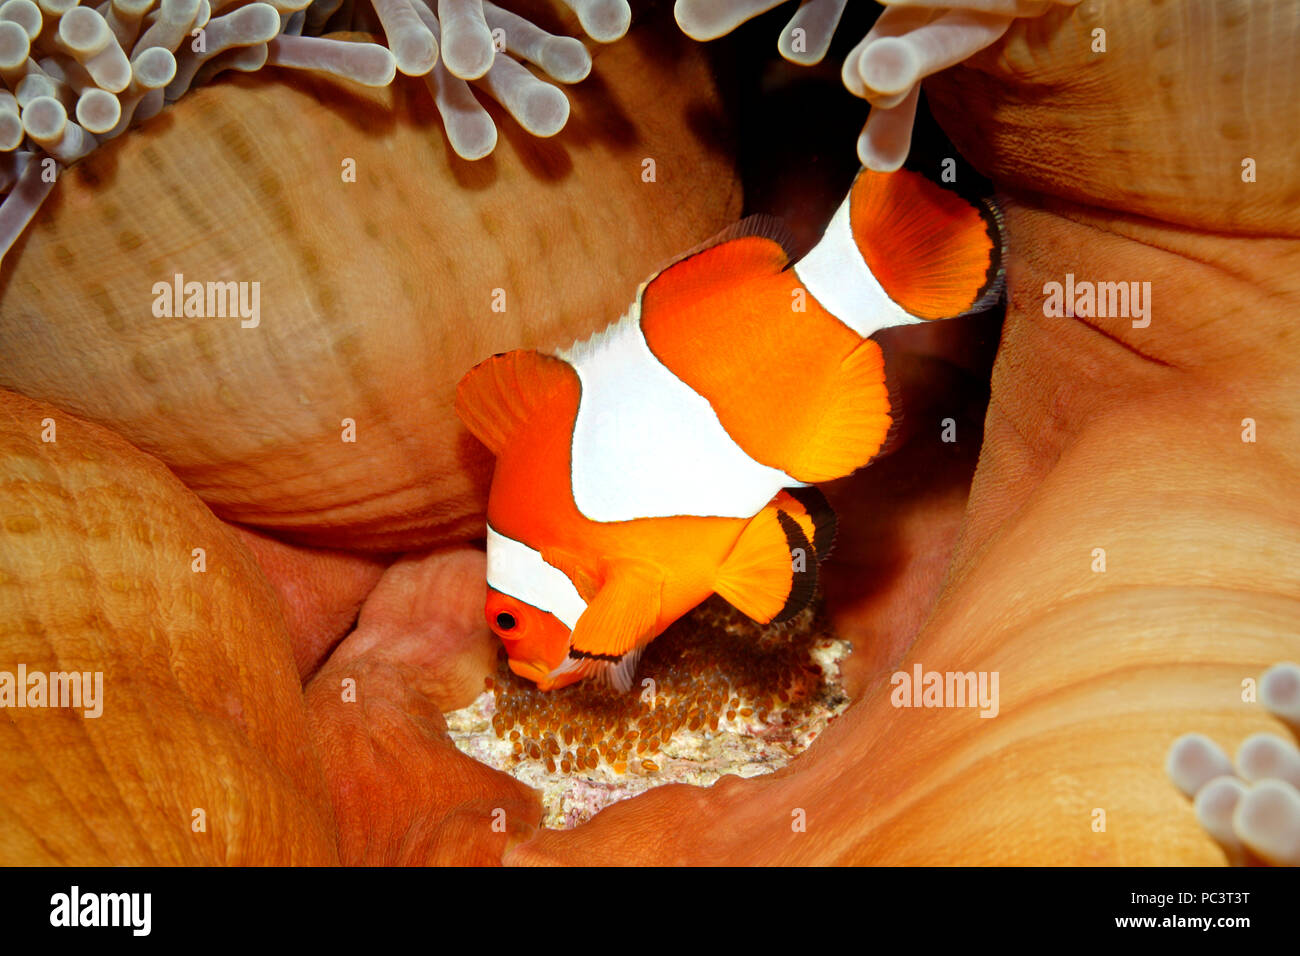 Clown Anemonefish Amphiprion ocellaris tending eggs laid at the base of the host Magnificent Anemone, Heteractis magnifica. Tulamben, Bali, Indonesia. Stock Photo